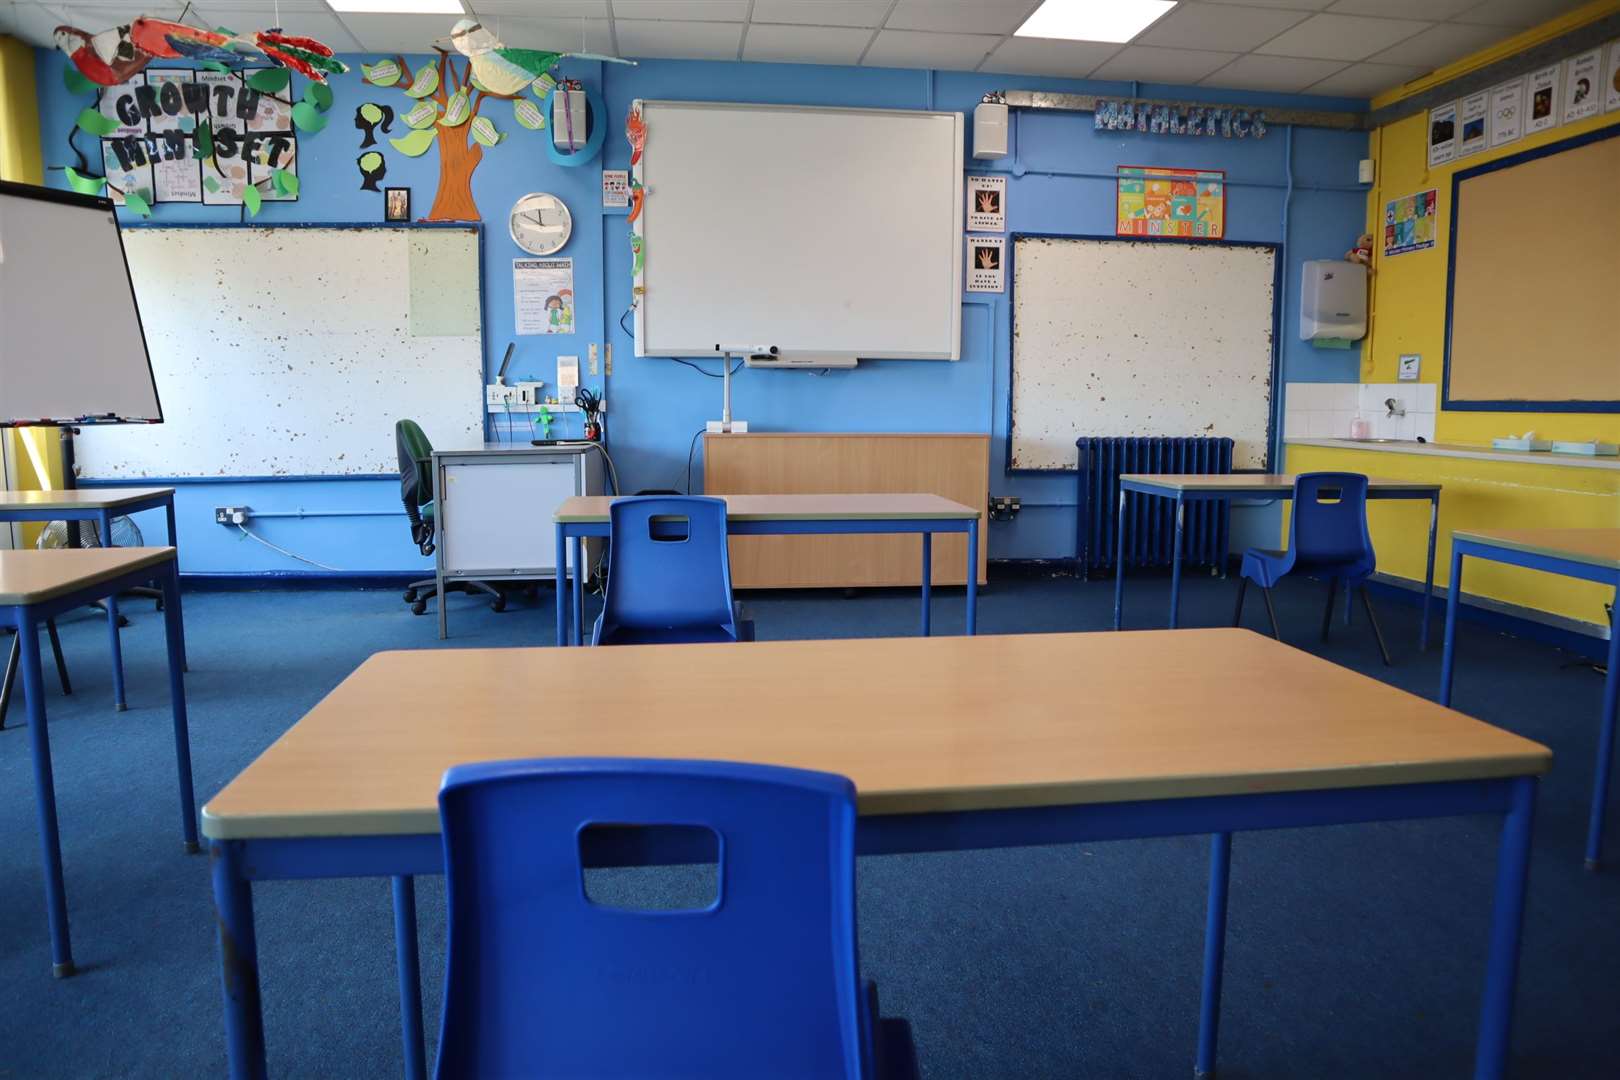 Desks in classrooms will still be socially distanced to allow pupils back into the class on Monday